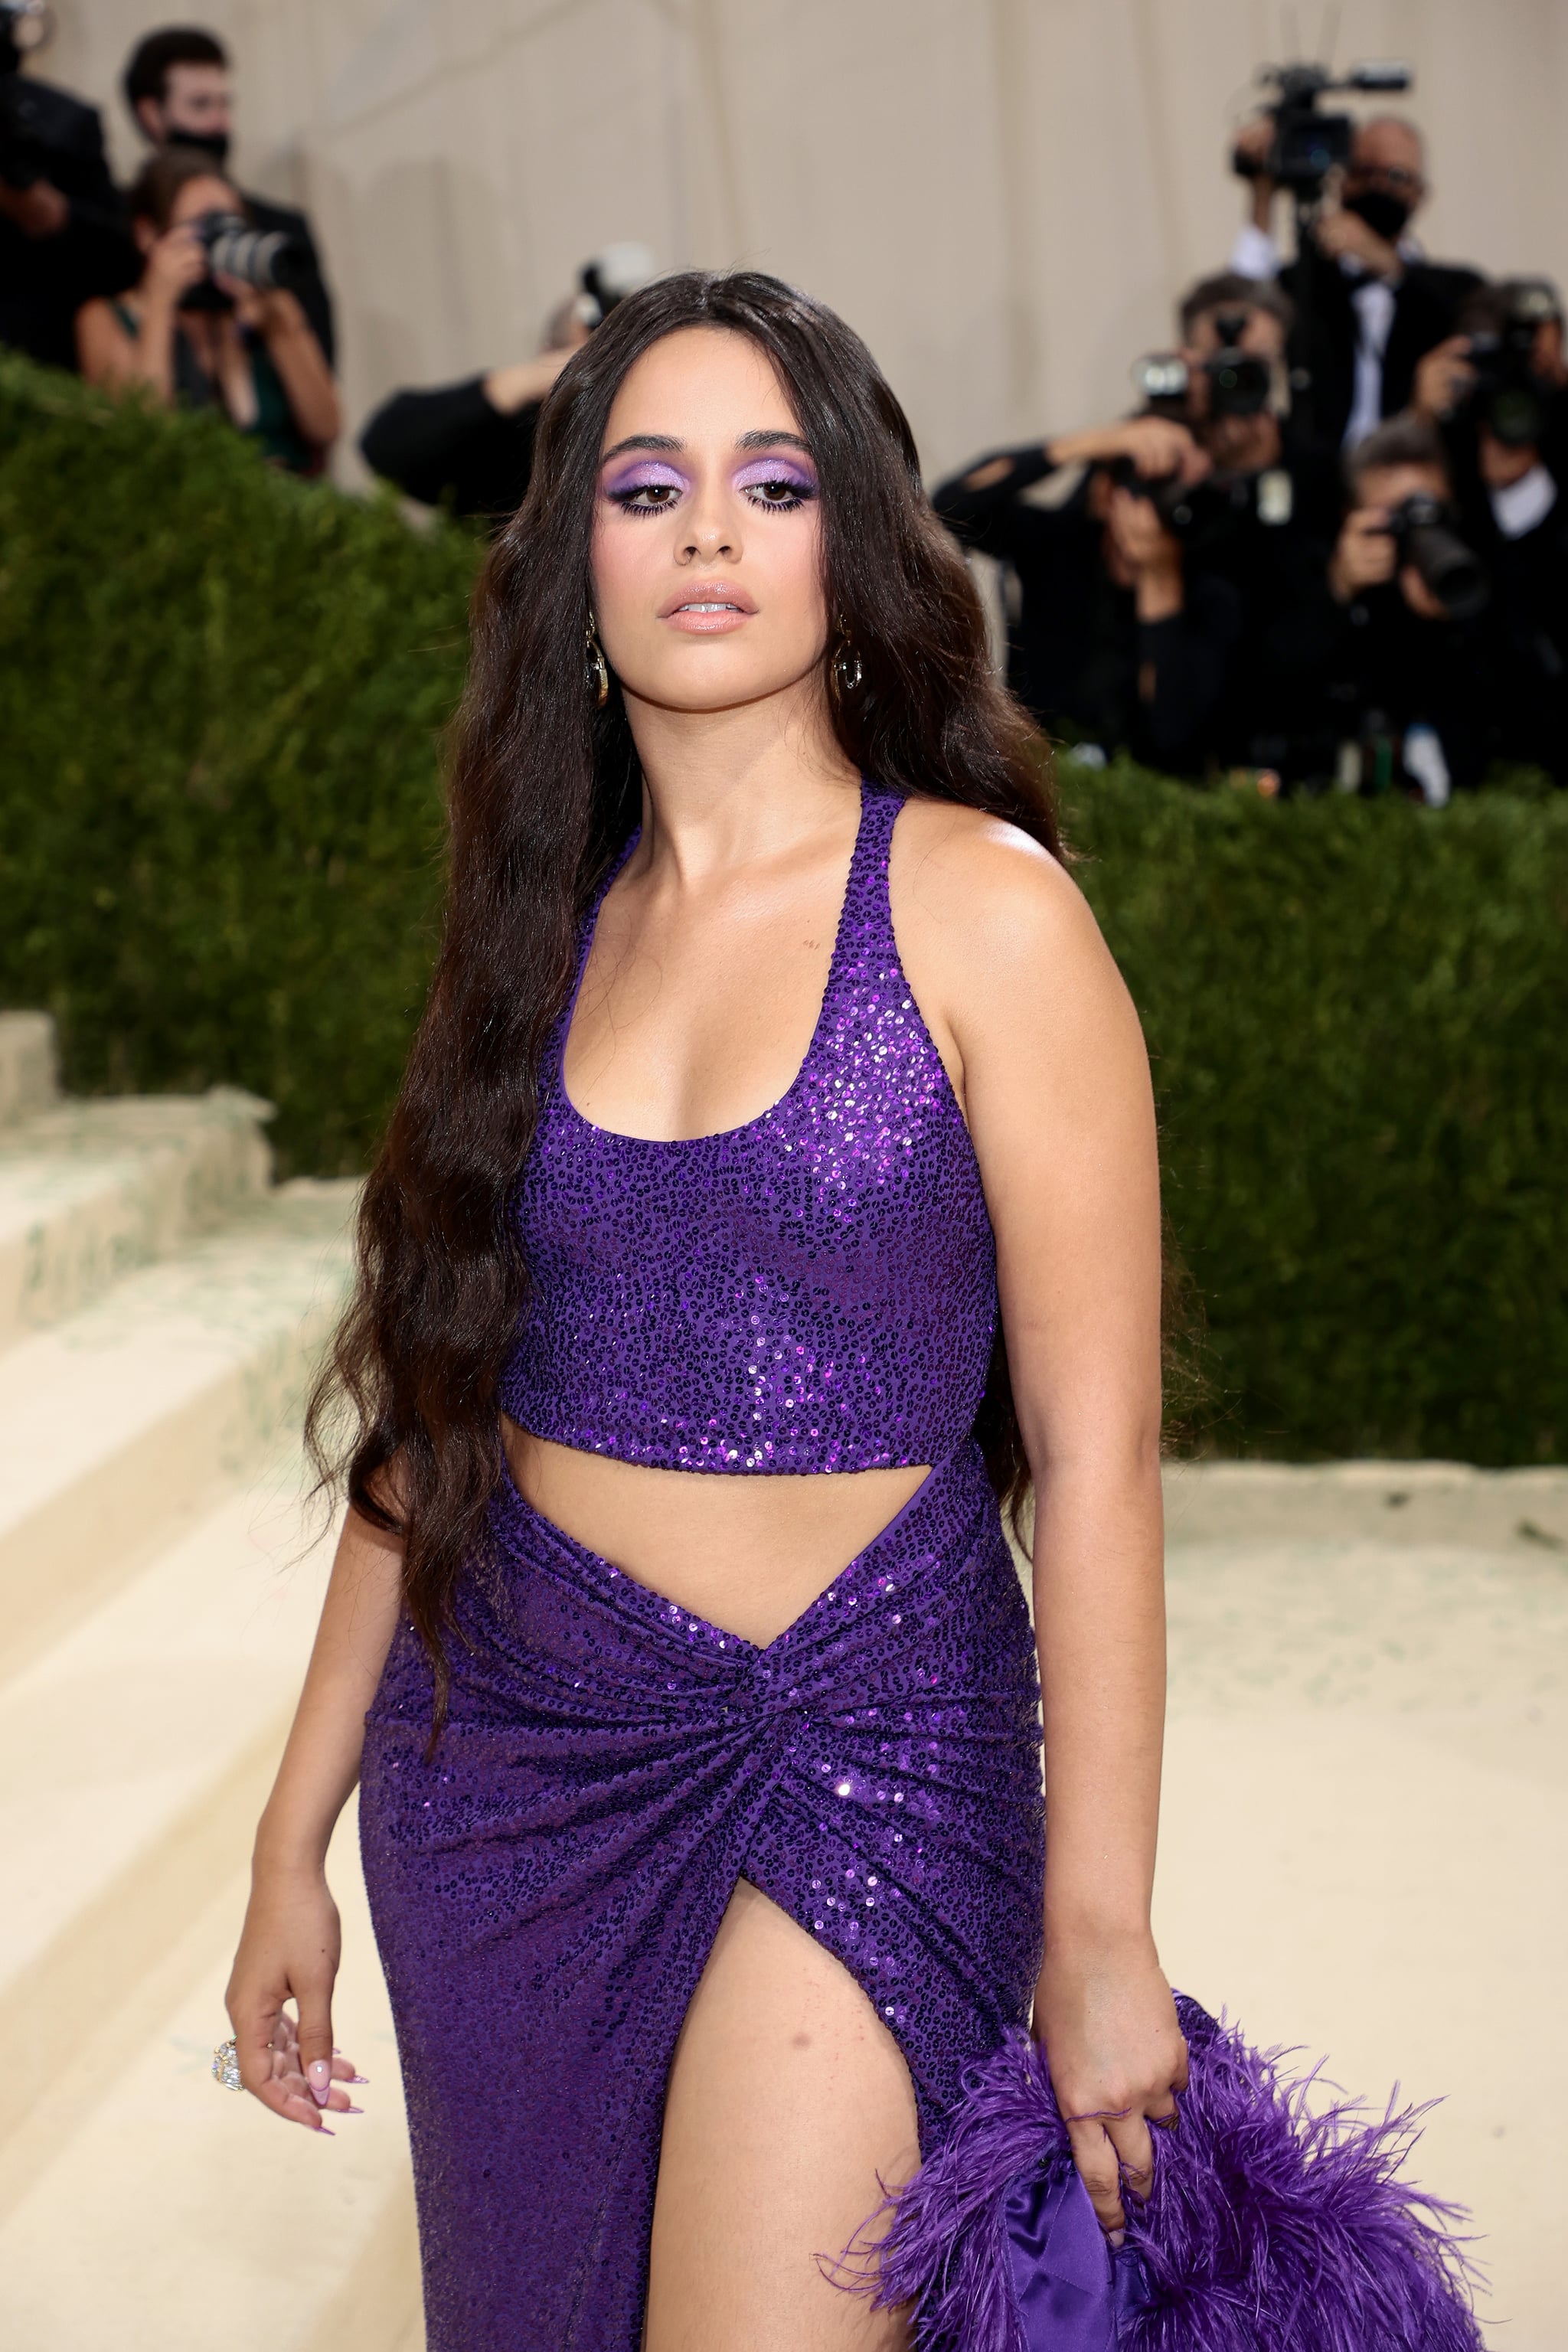 NEW YORK, NEW YORK - SEPTEMBER 13: Camila Cabello attends The 2021 Met Gala Celebrating In America: A Lexicon Of Fashion at Metropolitan Museum of Art on September 13, 2021 in New York City. (Photo by Dimitrios Kambouris/Getty Images for The Met Museum/Vogue )